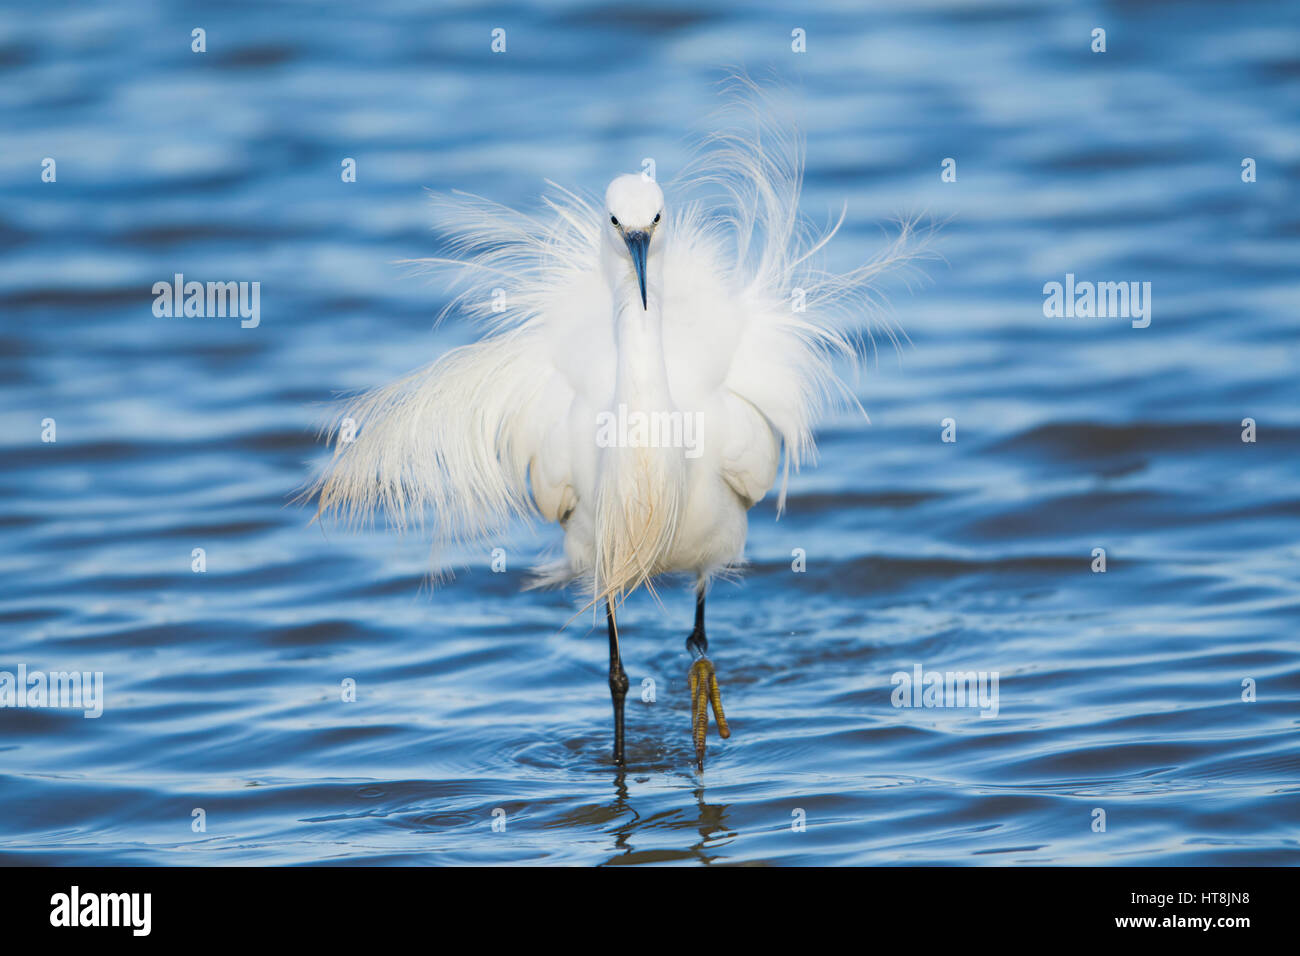 A Little Egret (Egretta garzetta) in display mode showing plumes and feathers while walking towards viewer, Minsmere, Suffolk, UK Stock Photo